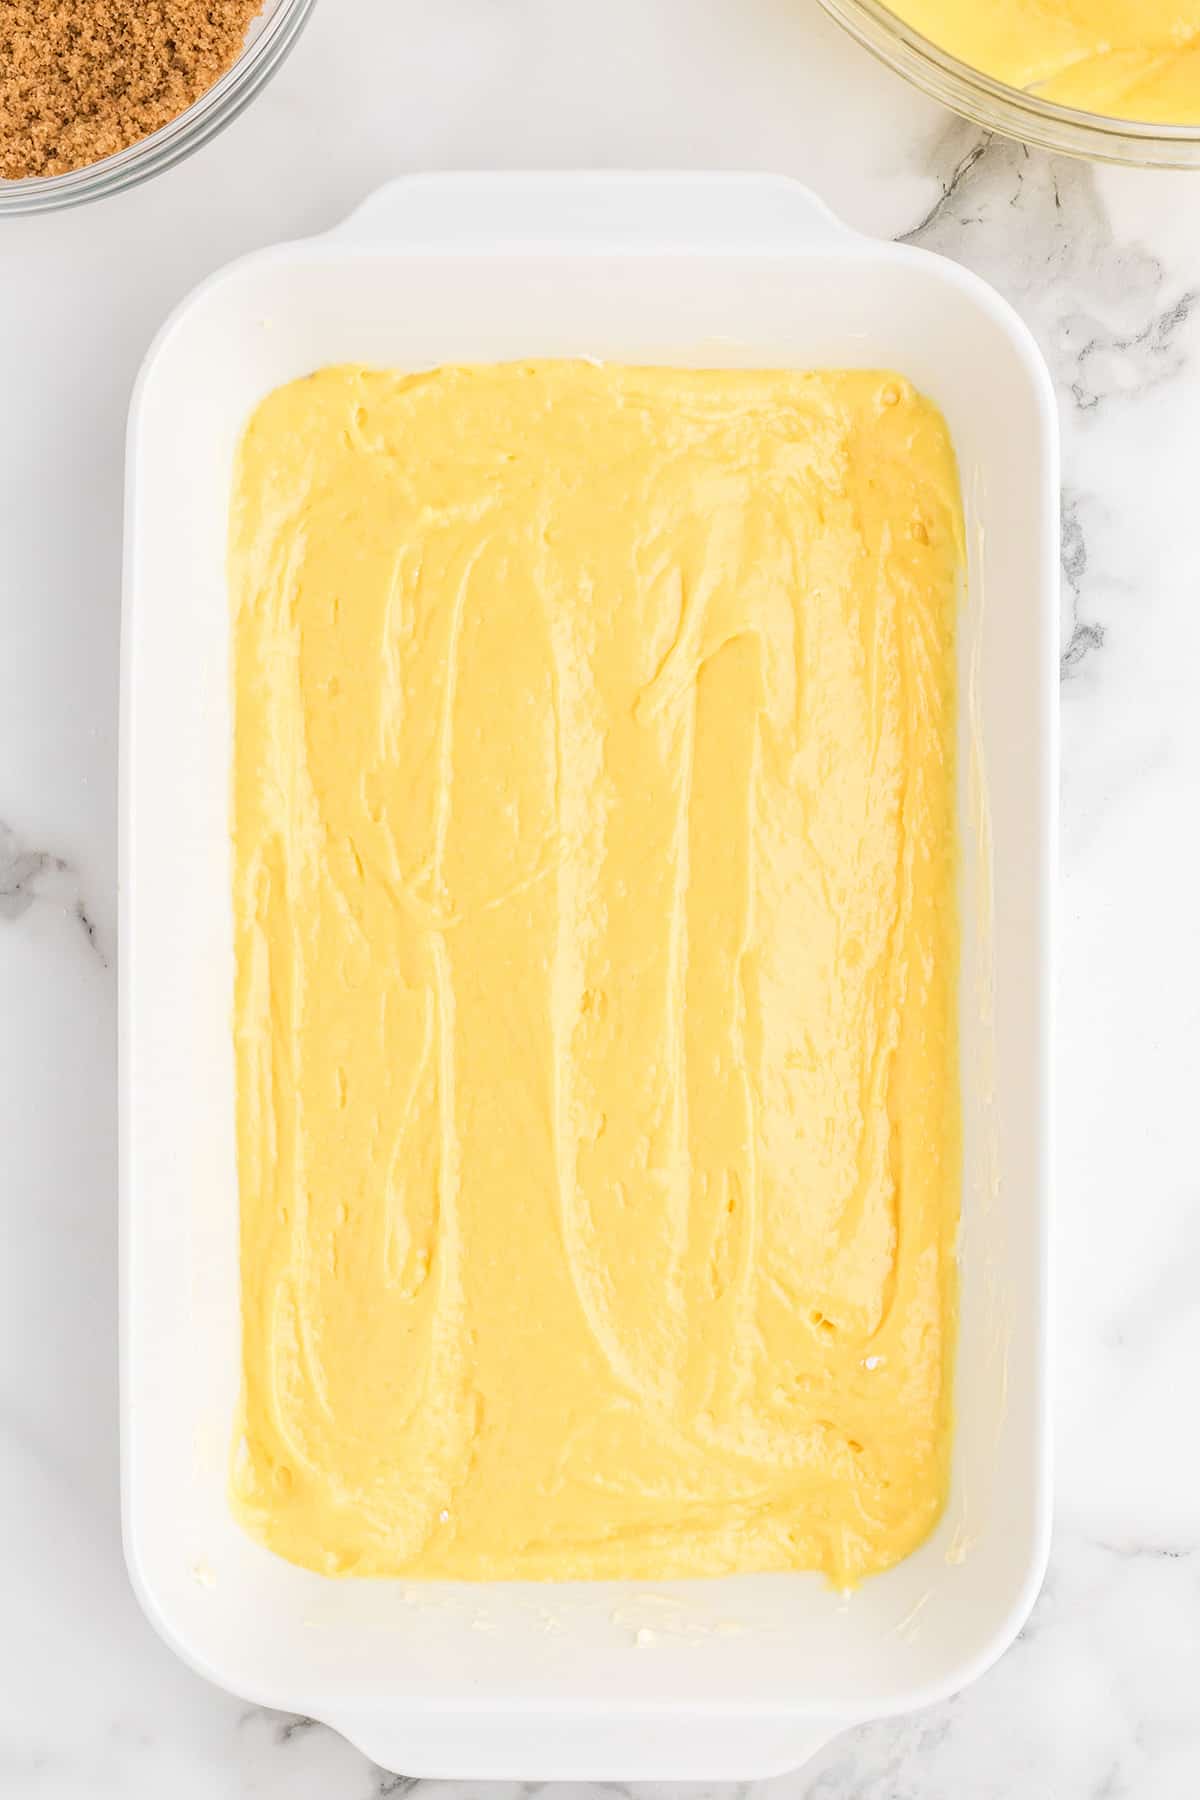 Half of the cake batter in a baking pan.